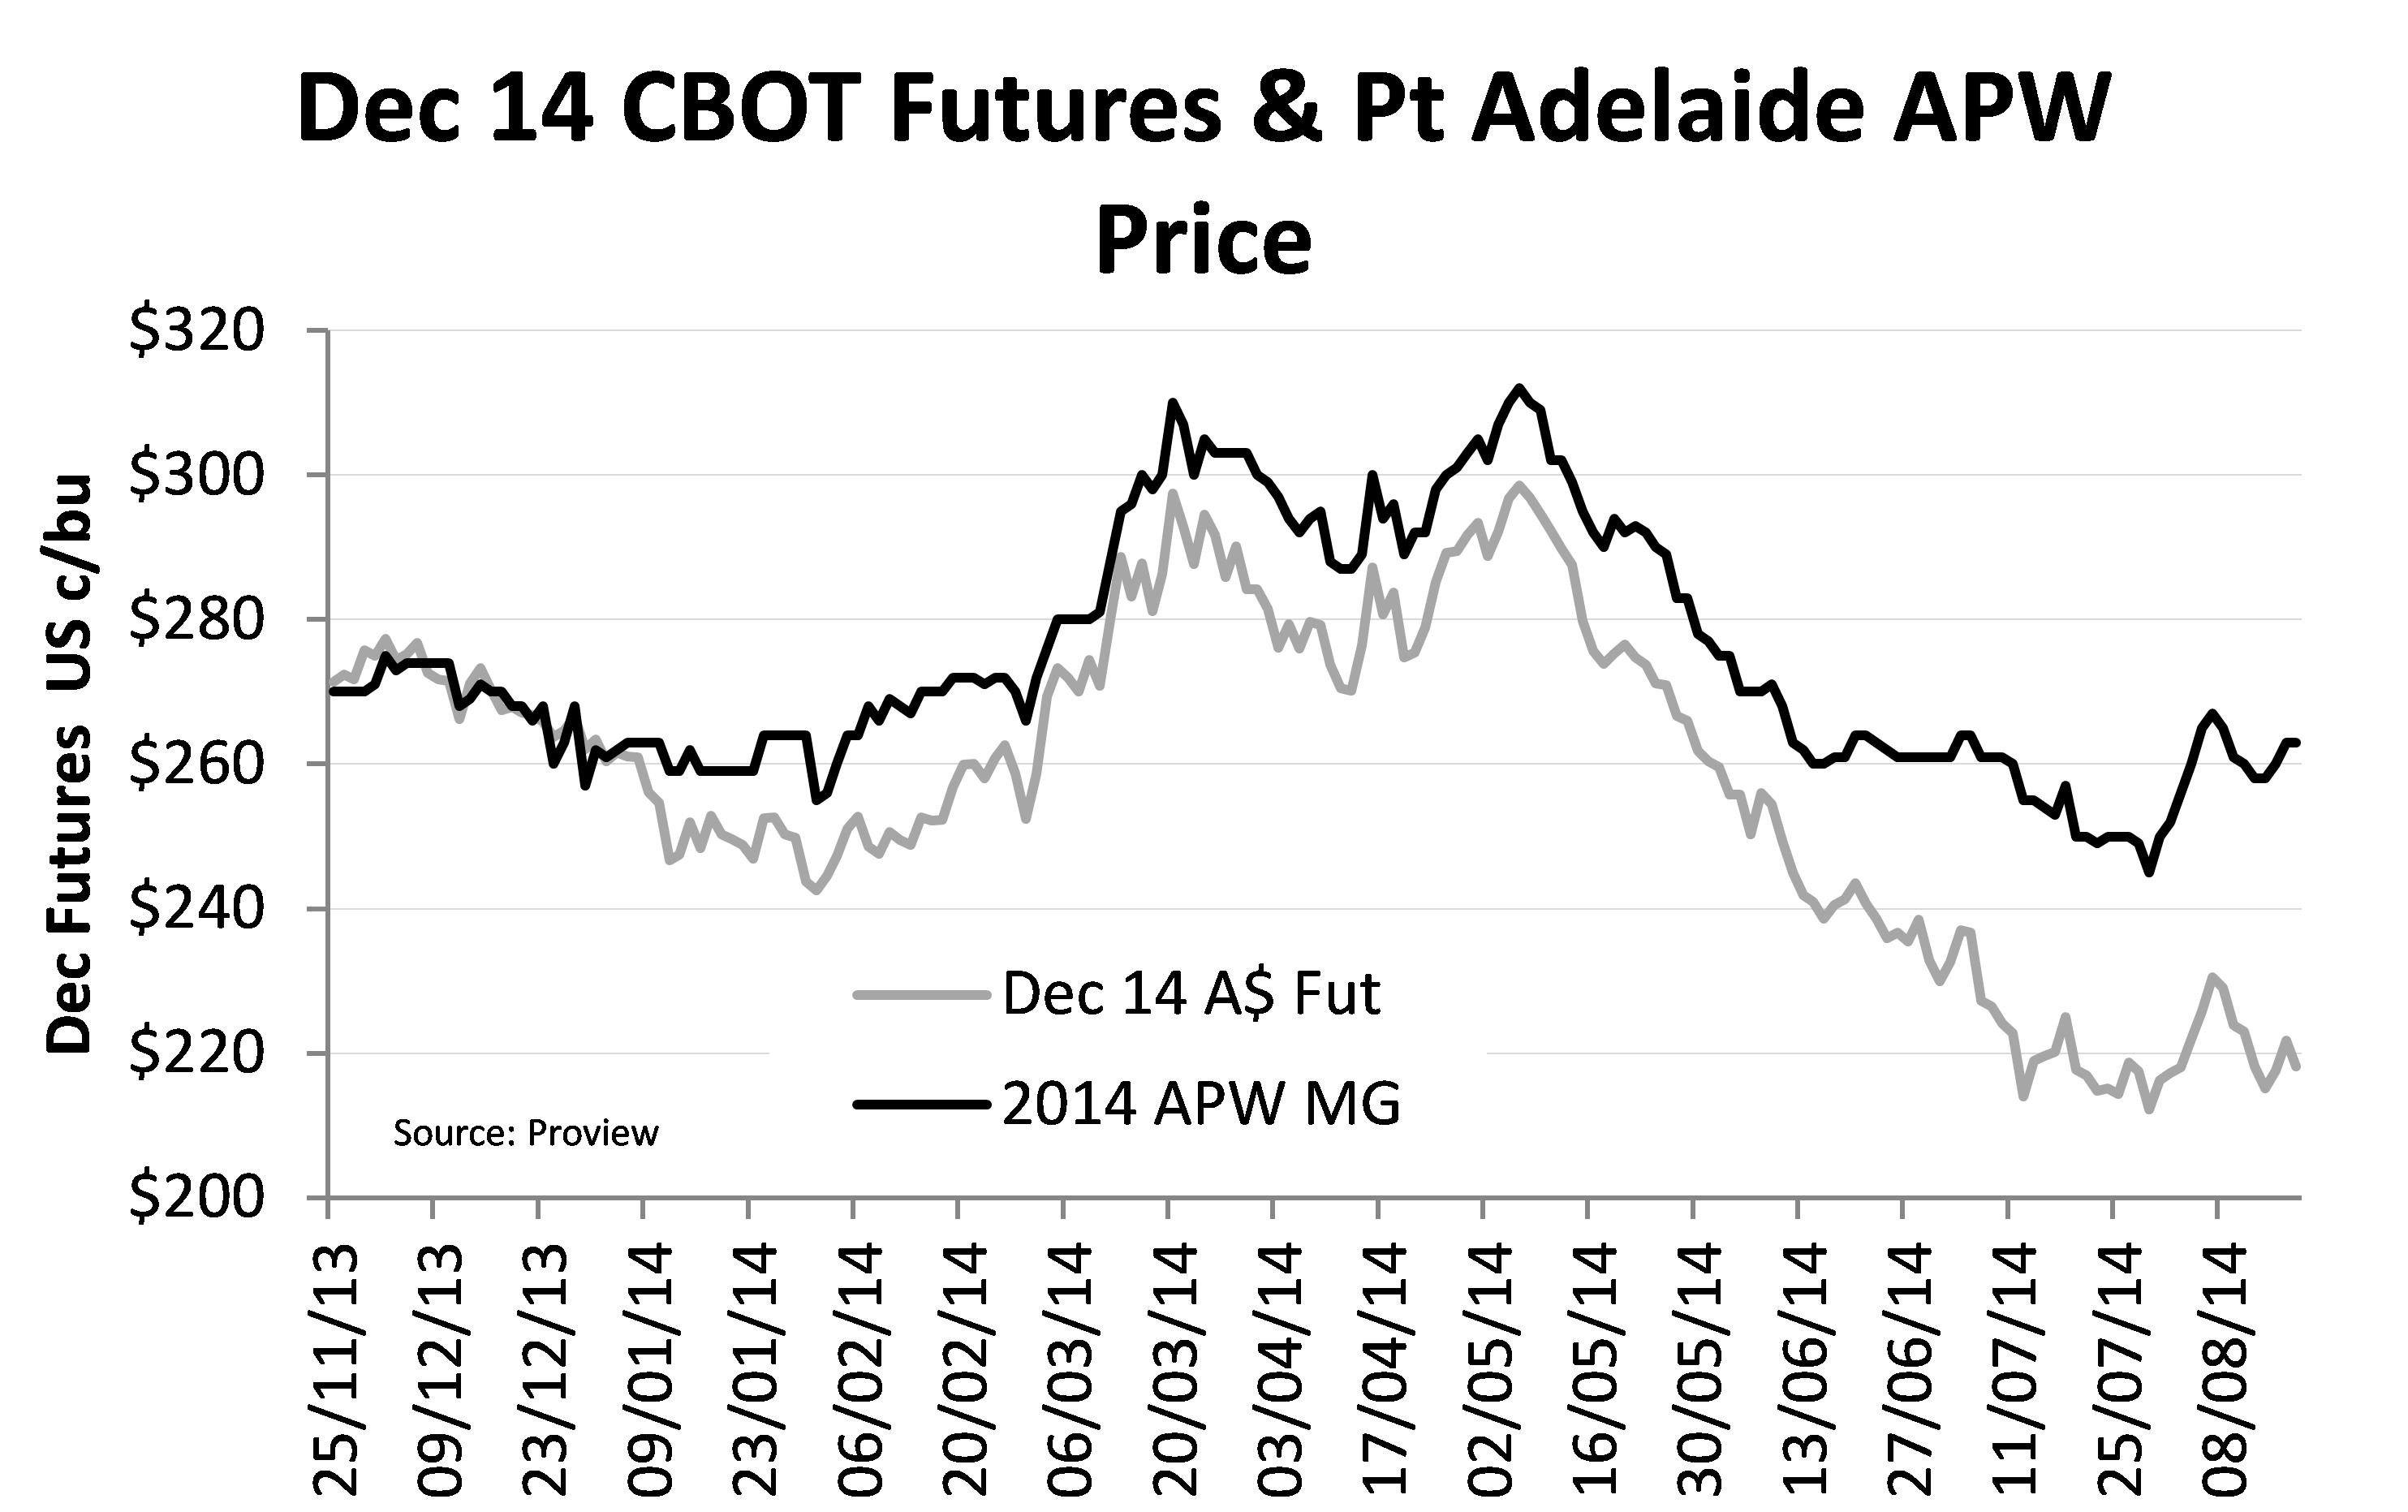 Figure 6. December 2014 CBOT futures and Port Adelaide APW price.